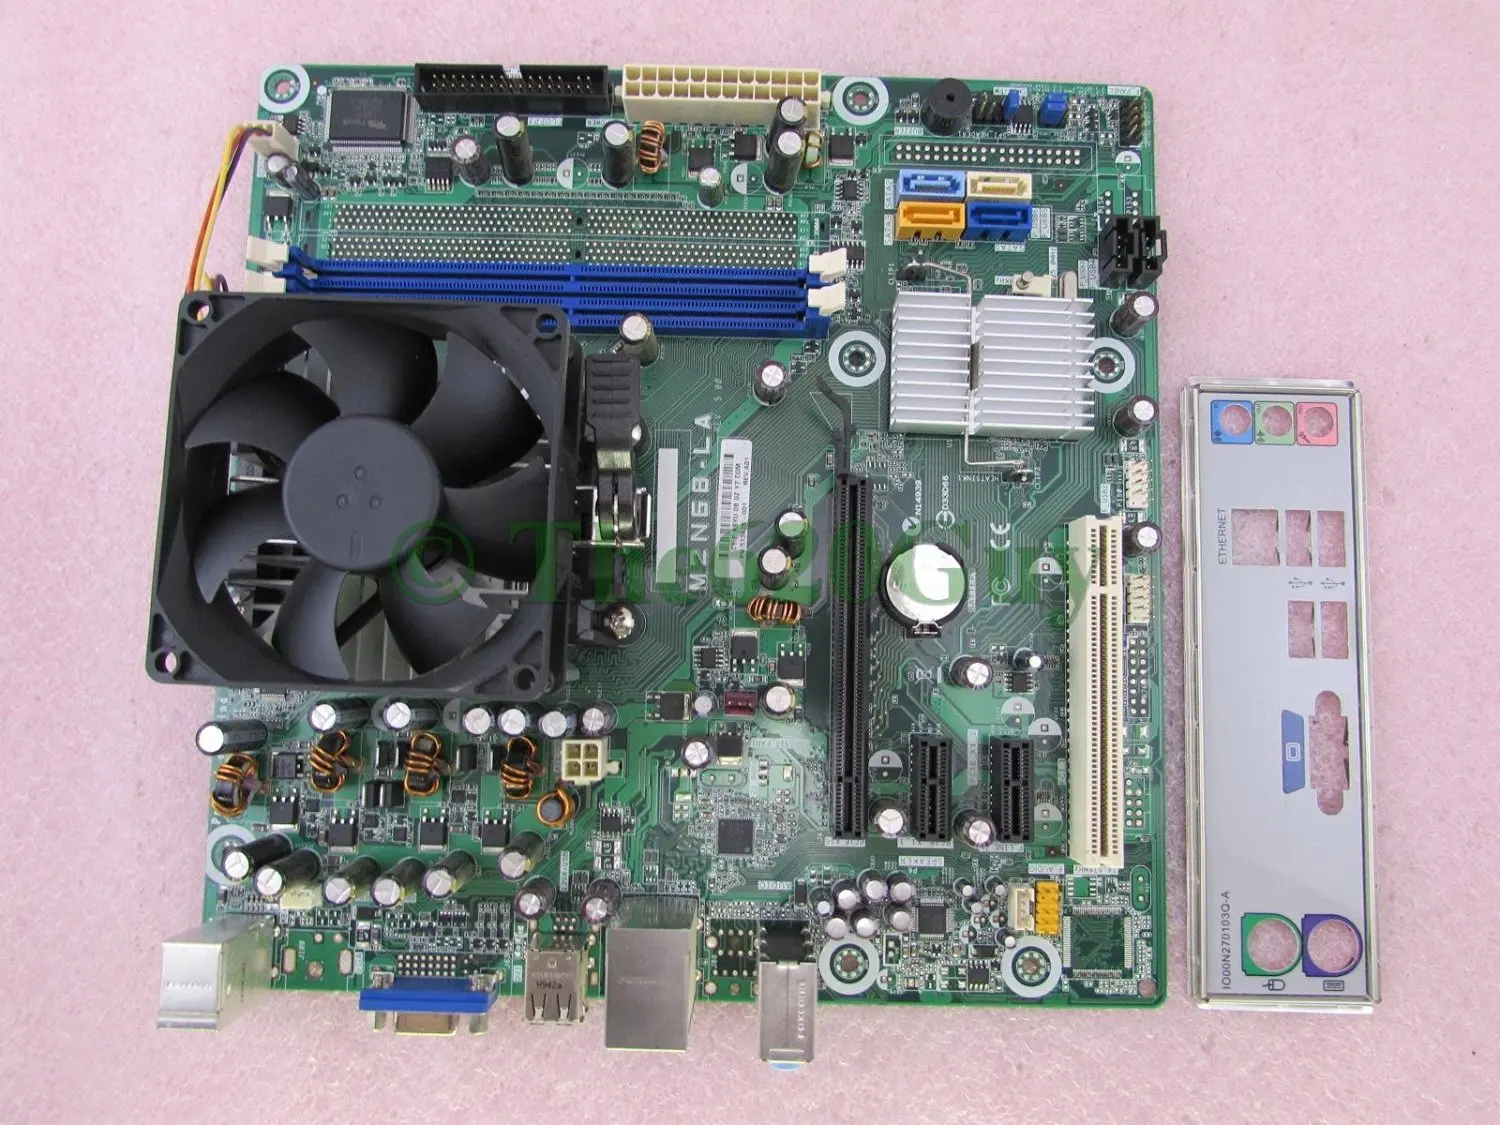 Cheap Athlon X2 Motherboard Find Athlon X2 Motherboard Deals On Line At Alibaba Com